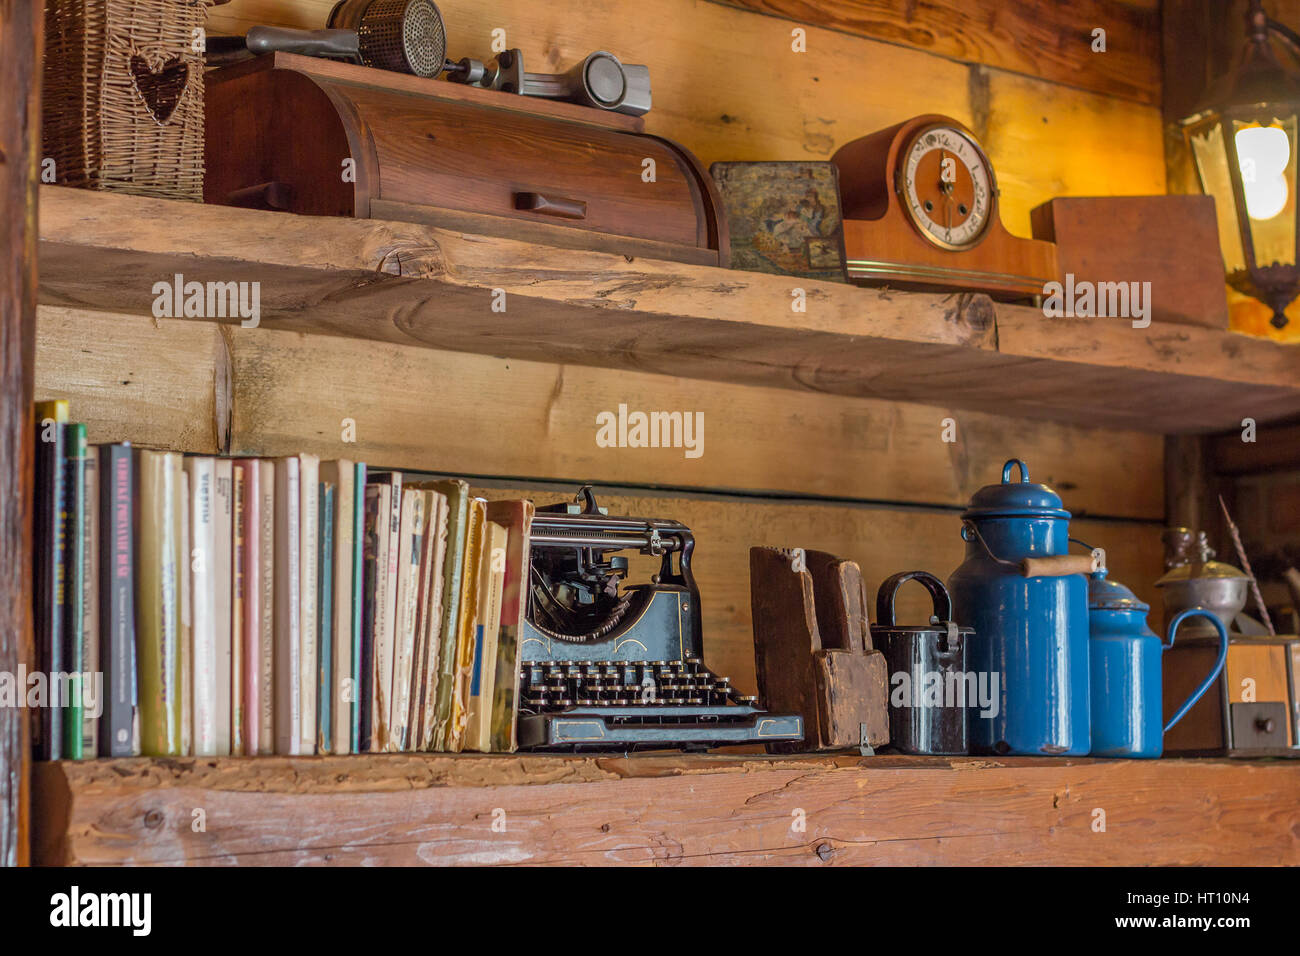 Detail view on old wooden shelf with journals and antique typewriter  jugs  clock and other objects Stock Photo